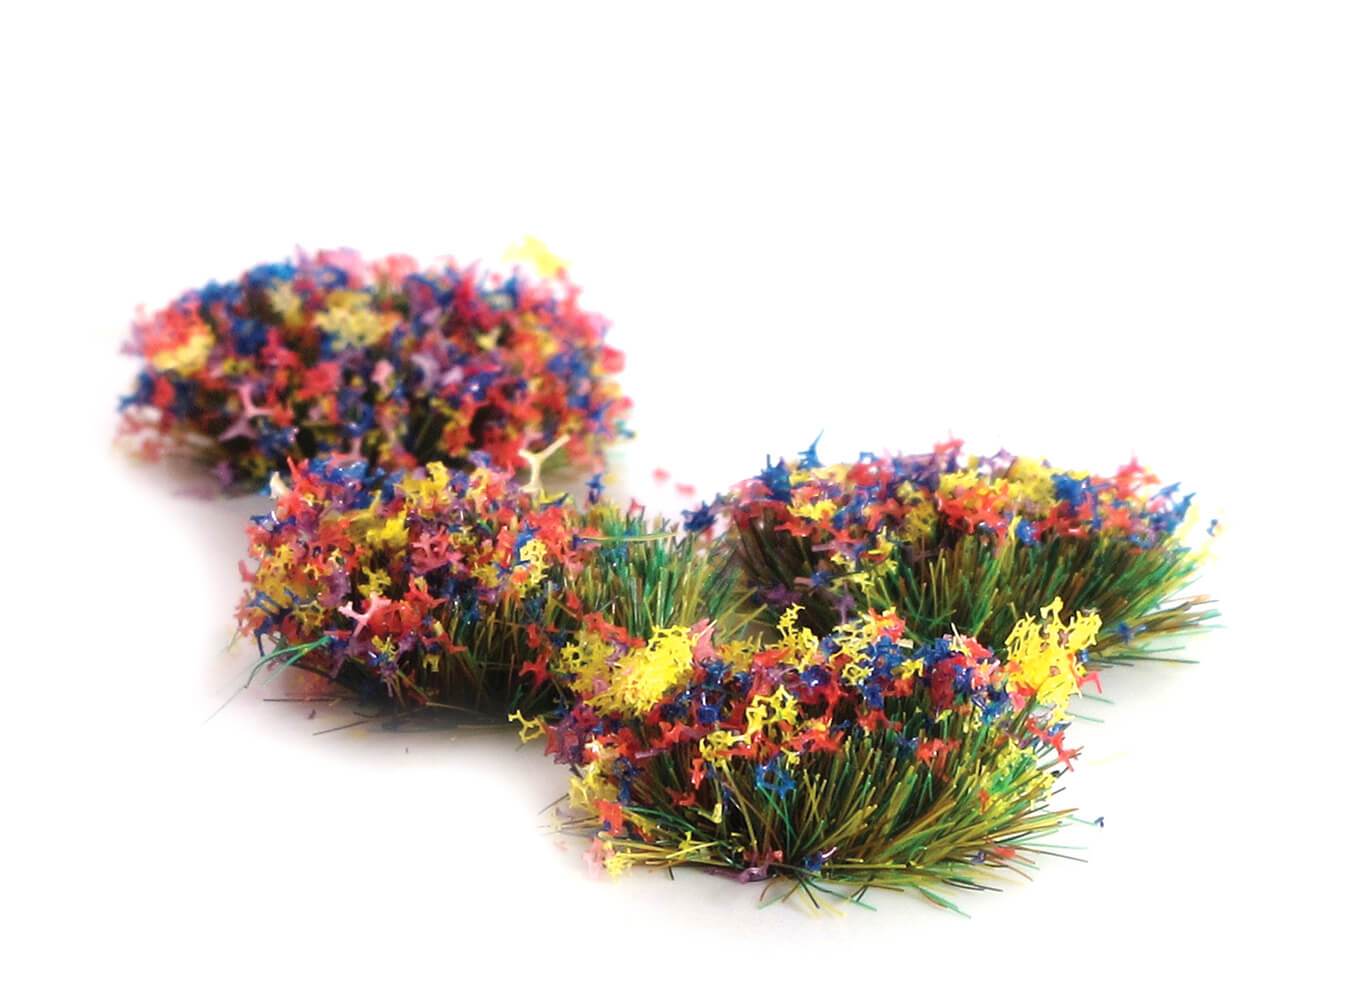 4mm Self Adhesive Grass Tufts with Flower